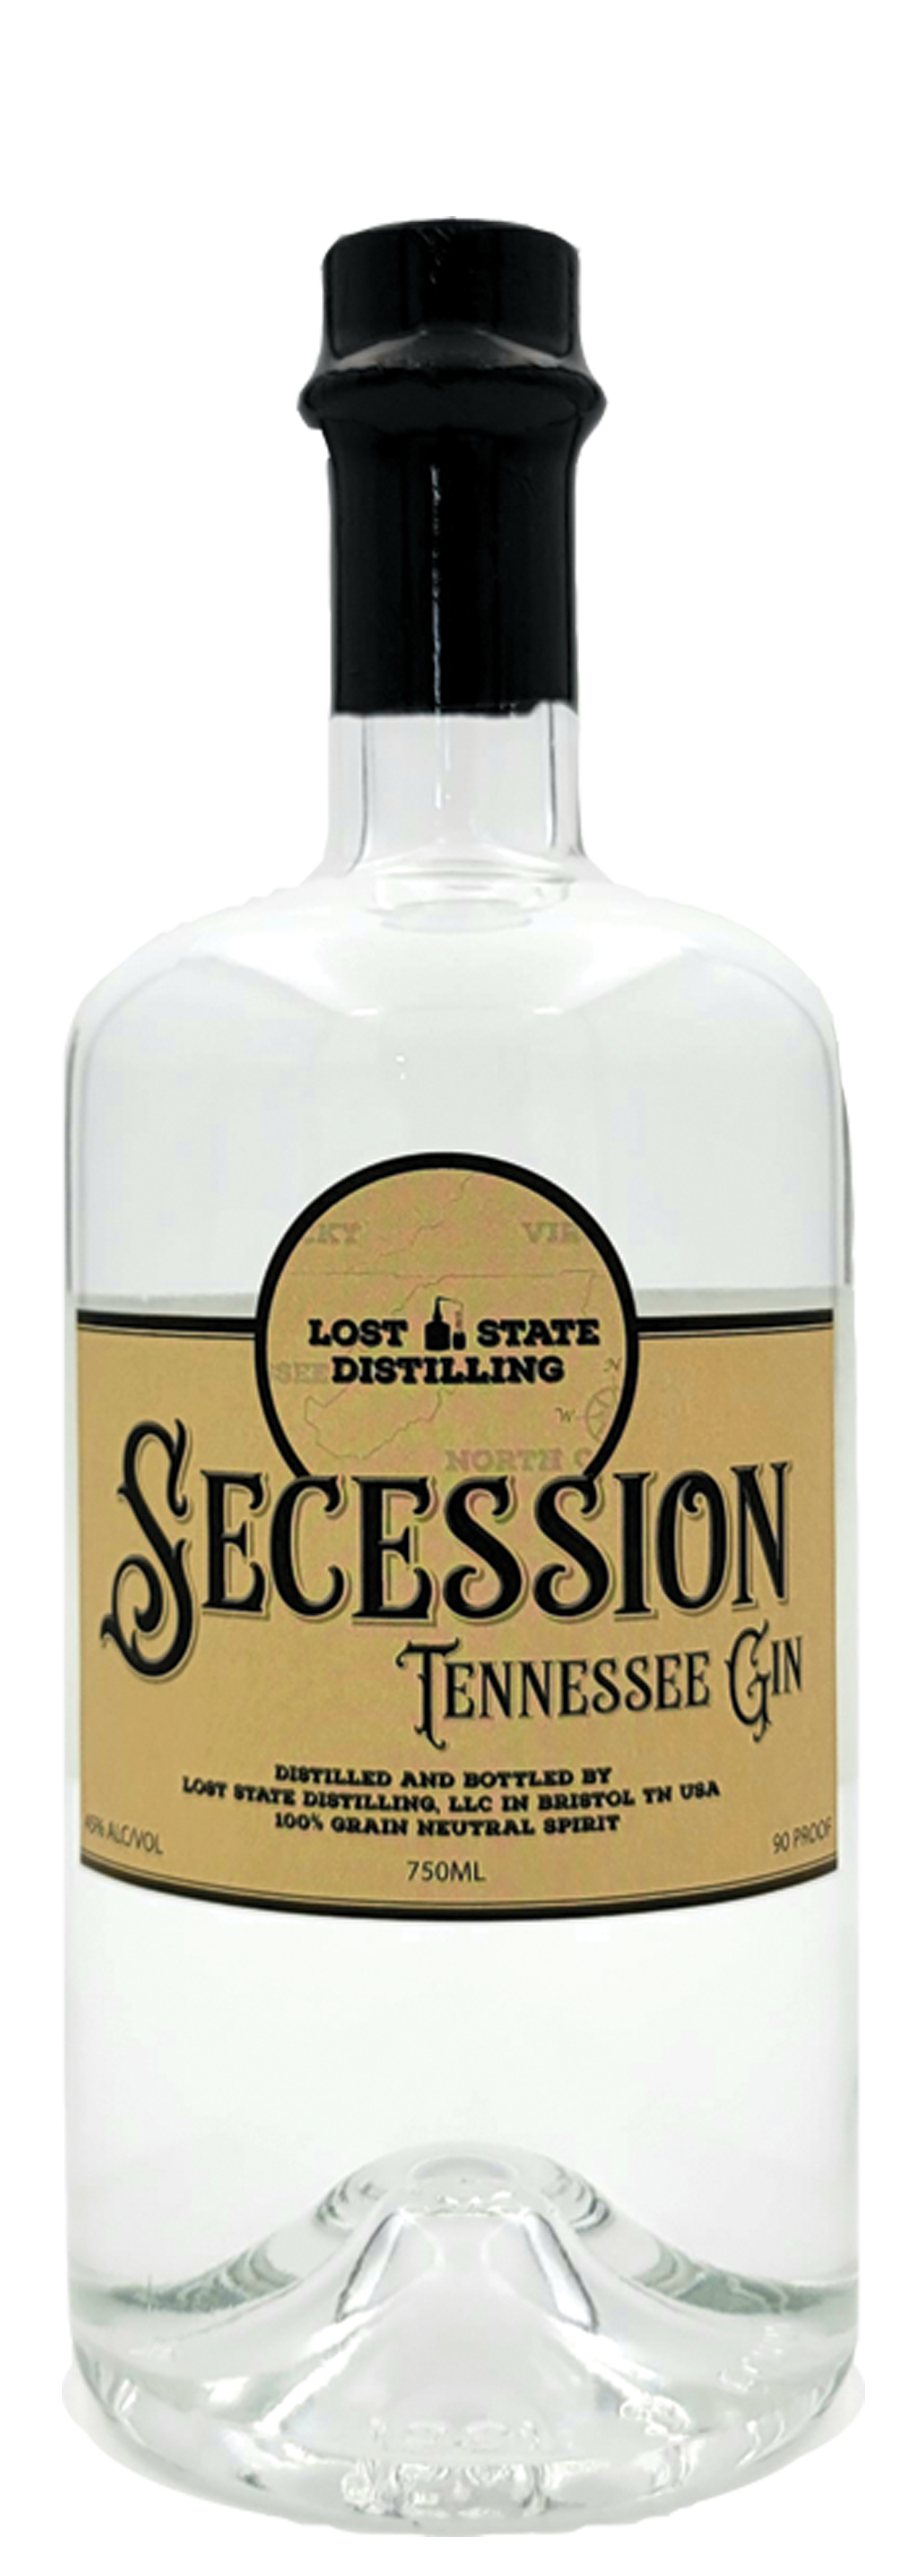 Lost State - Secession Tennessee Gin